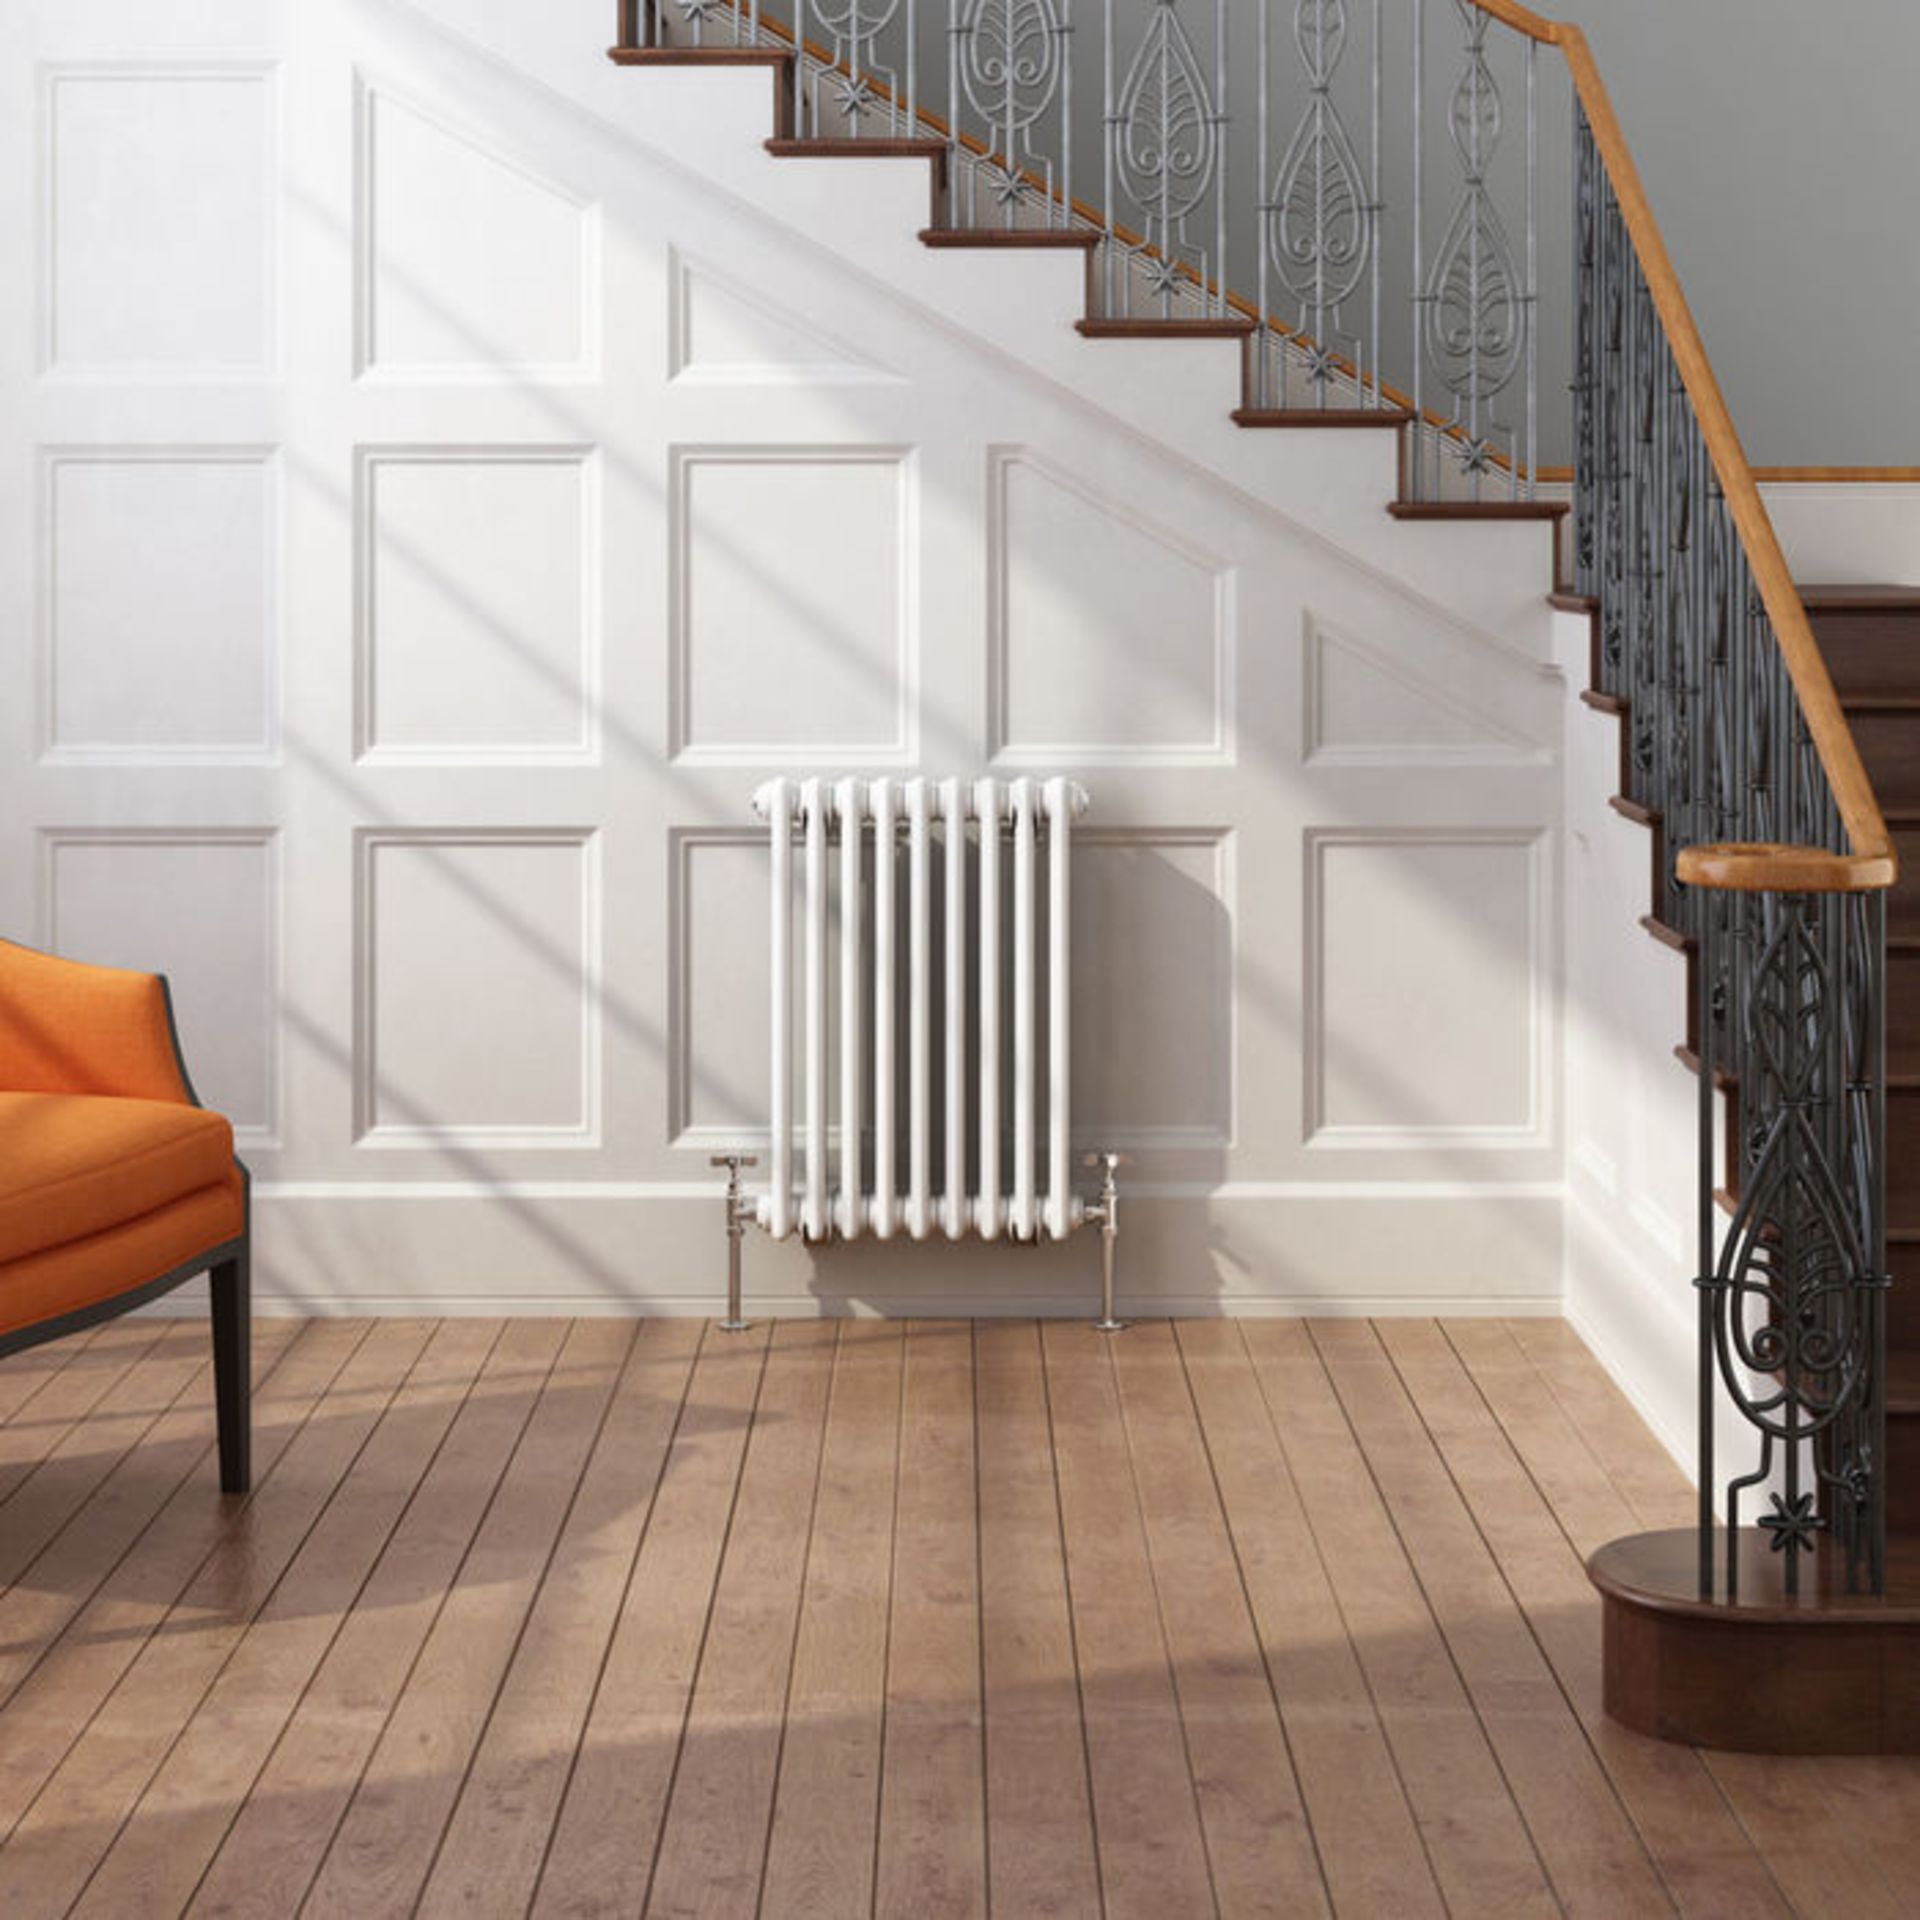 (DW34) 600x420mm White Double Panel Horizontal Colosseum Traditional Radiator. RRP £329.99. Ma... - Image 2 of 4